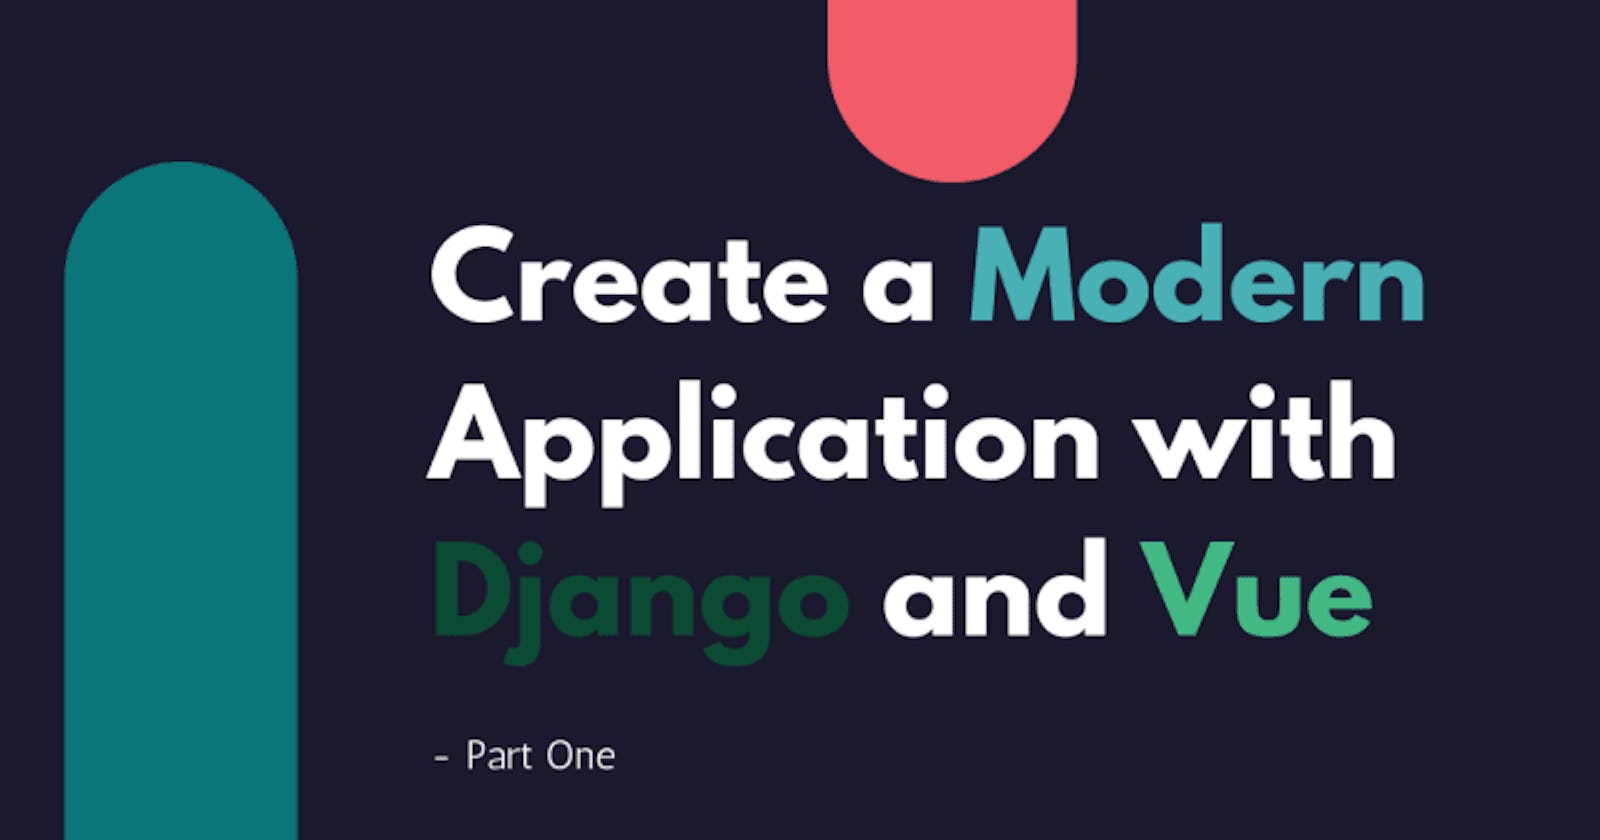 Create a Modern Application with Django and Vue